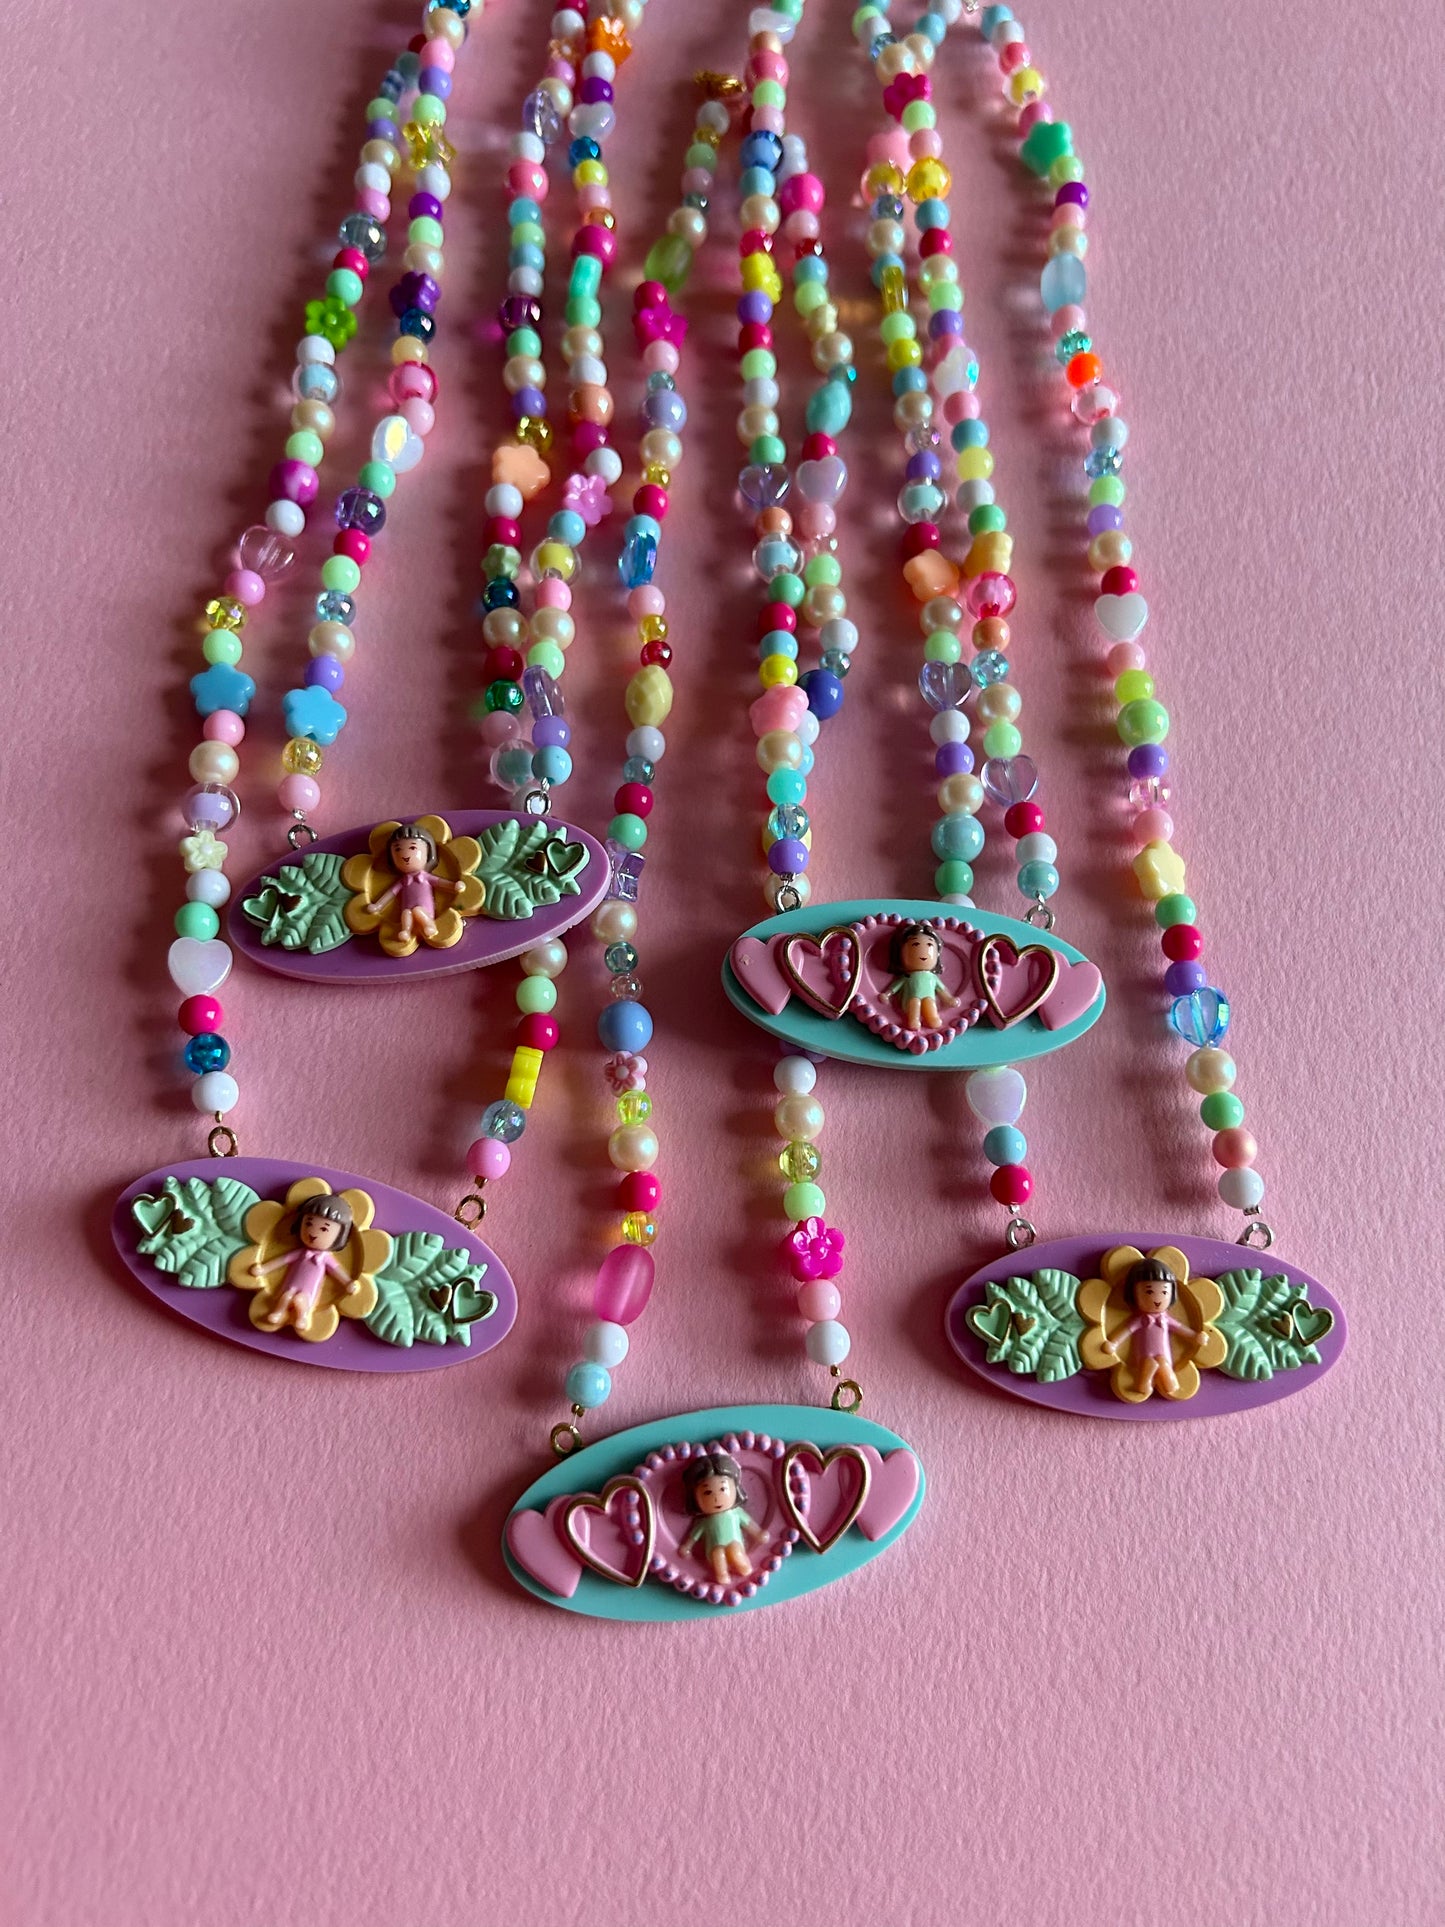 Polly Pocket Girly Beaded Necklaces